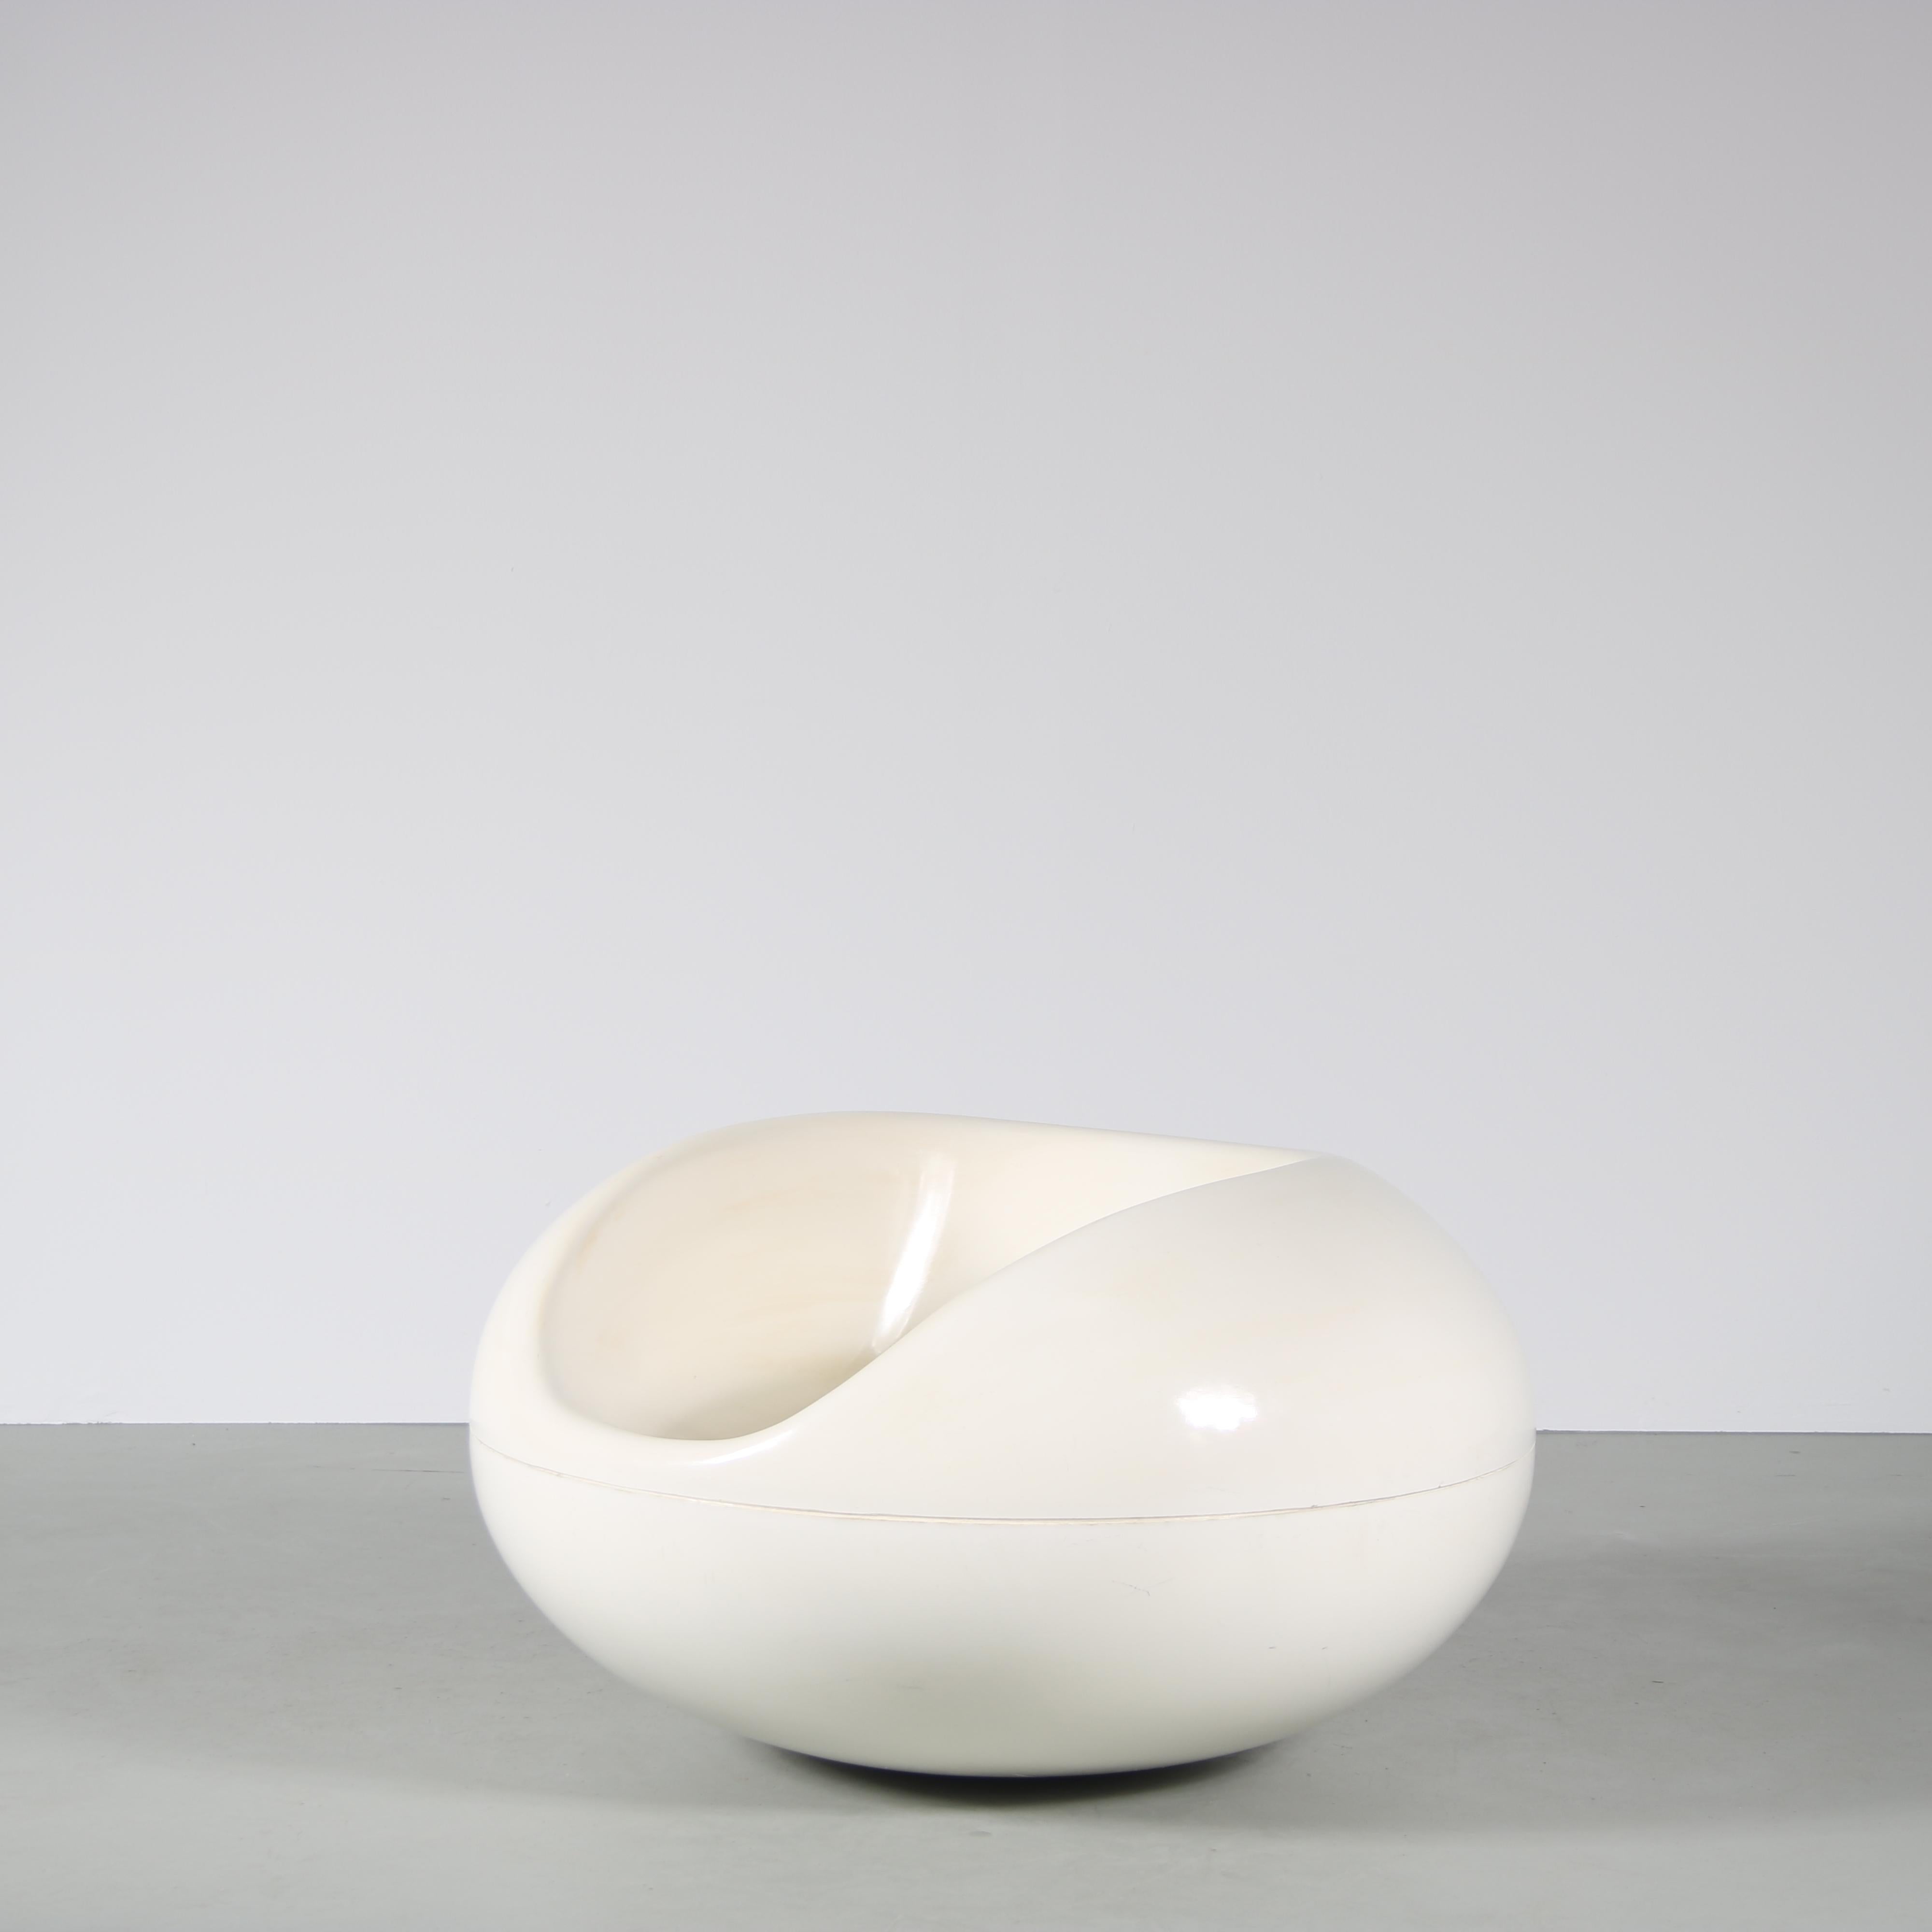 A “Pastil” chair designed by Eero Aarnio, manufactured by Asko in Finland around 1970.

Made of white plastic, this space-age style chair is a real eye-catcher to any decor! Molded into an egg shape with a curved, ergonomically shaped opening for